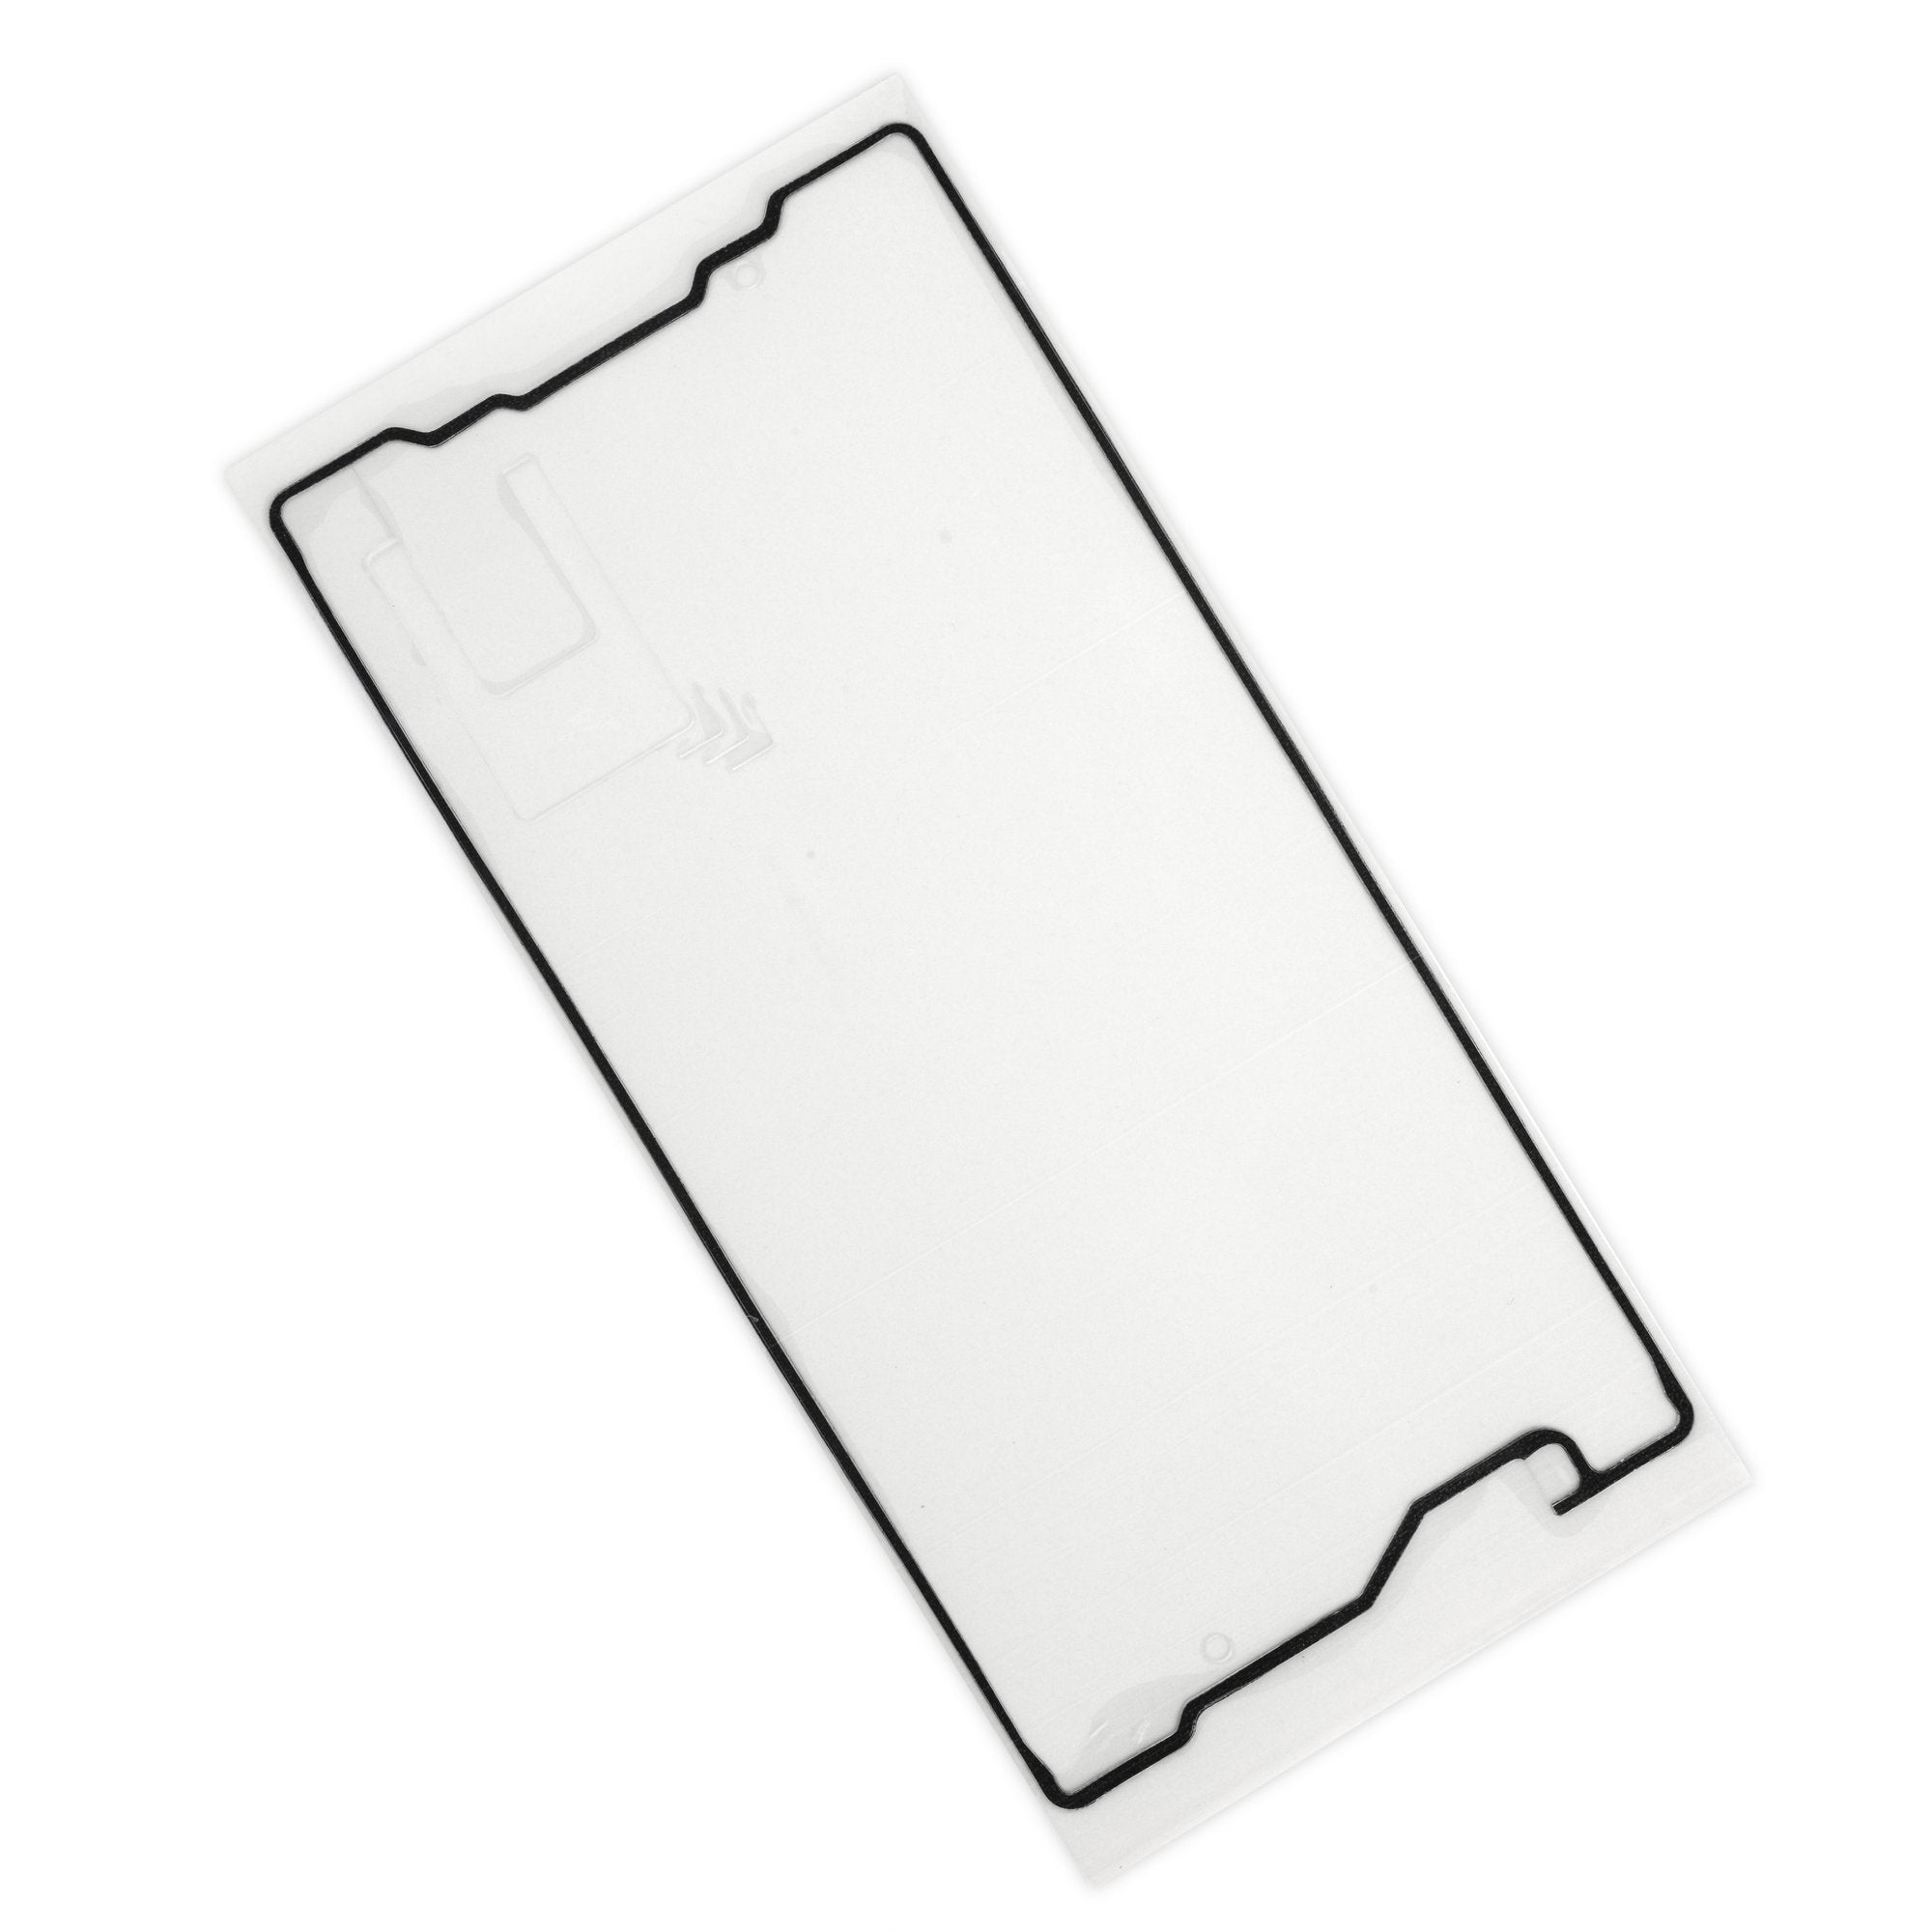 Sony Xperia Z5 Compact Display Adhesive Strips